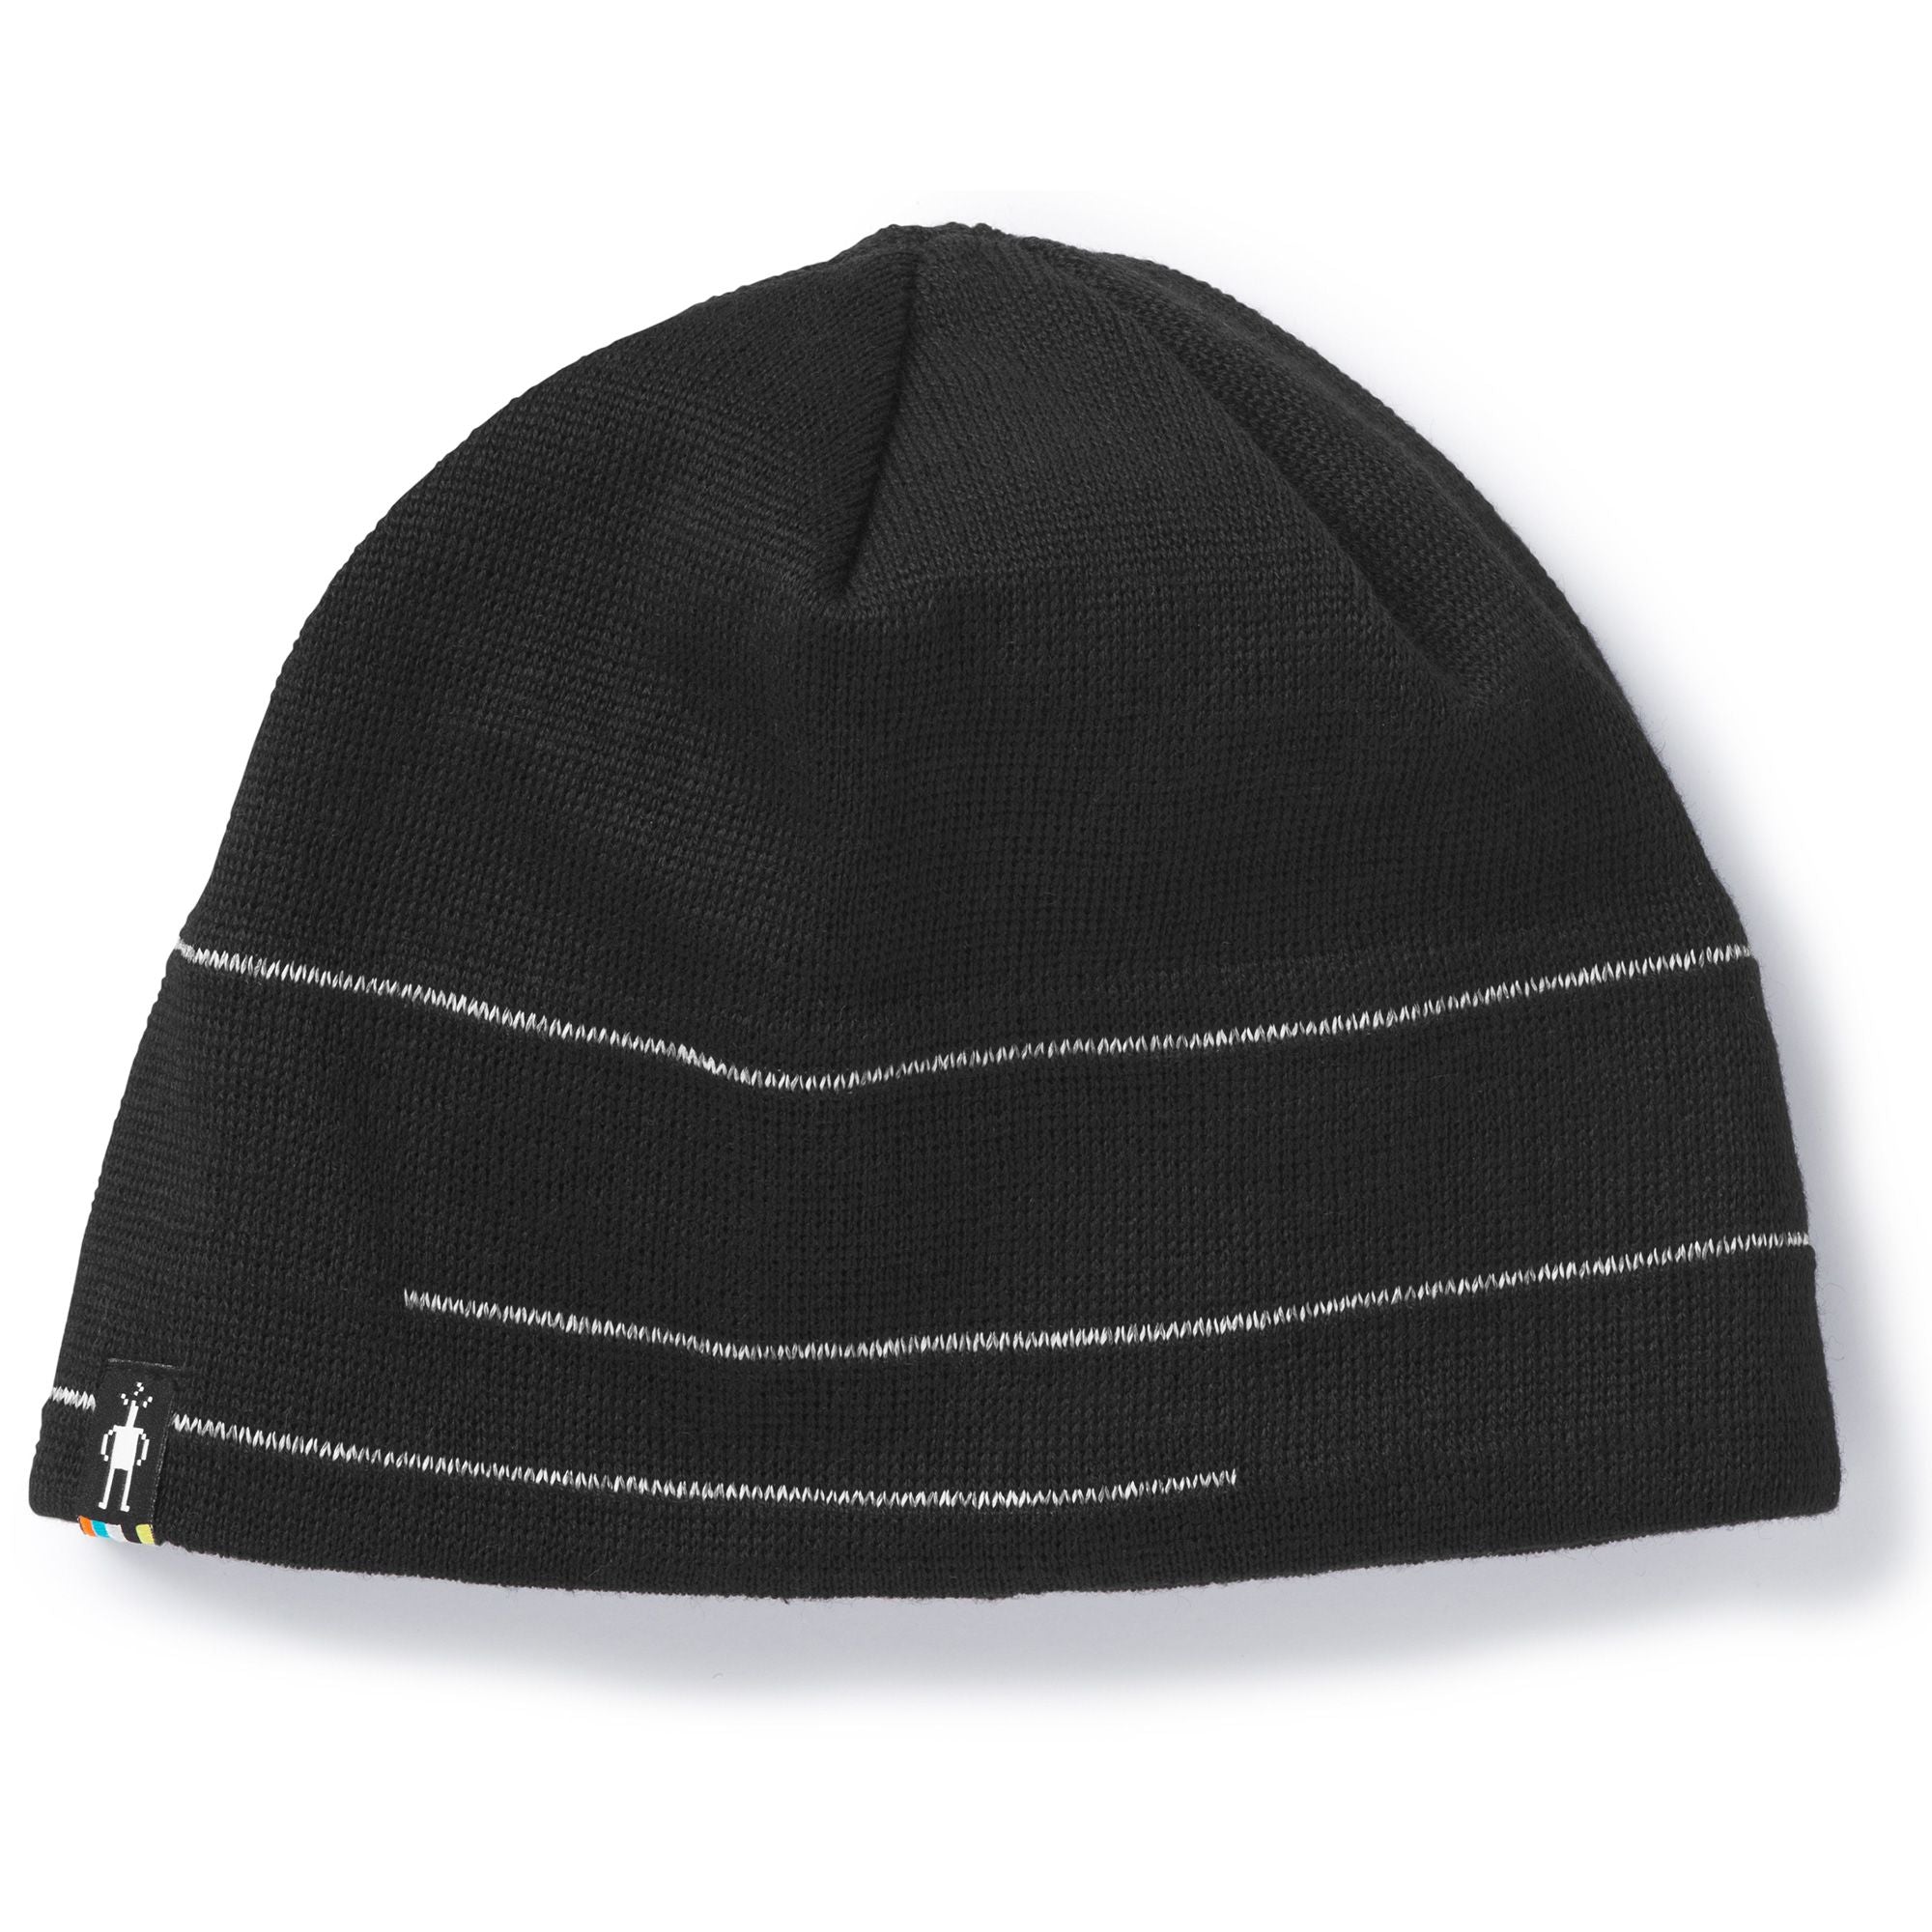 Smartwool Reflective Lid Beanie